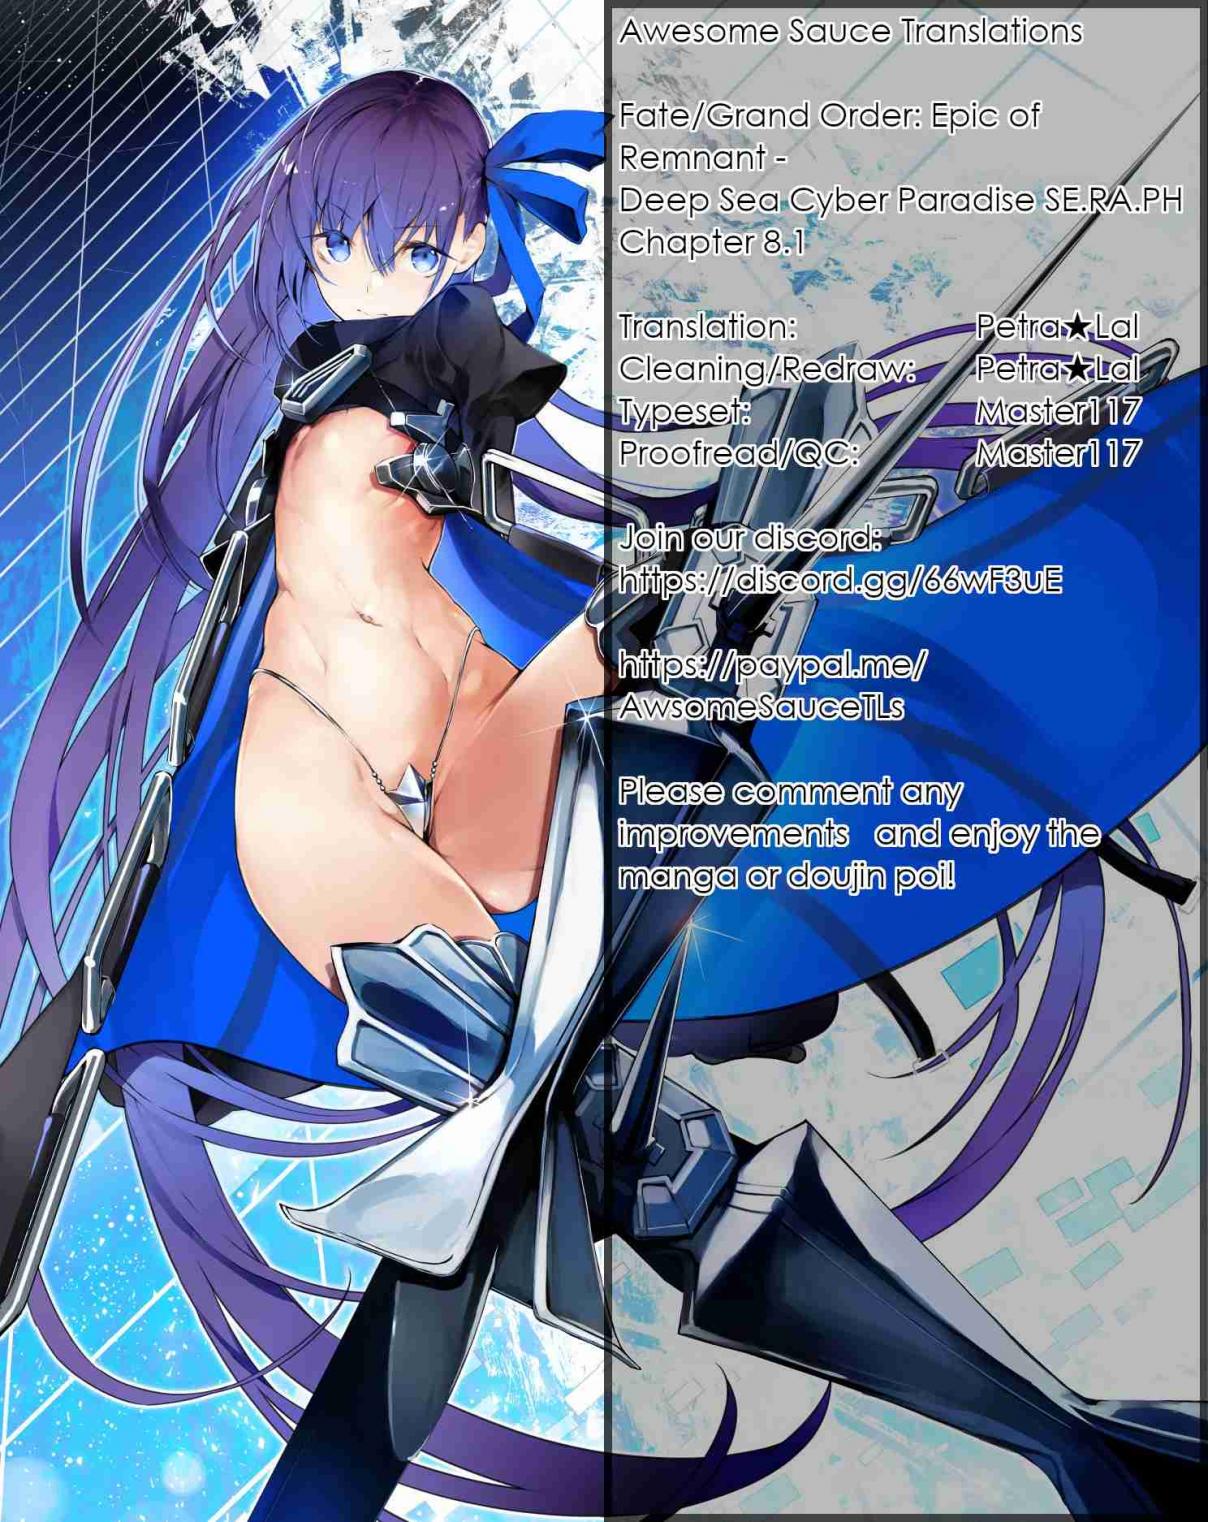 Fate/Grand Order -Epic of Remnant- Deep Sea Cyber-Paradise, SE.RA.PH 8.1